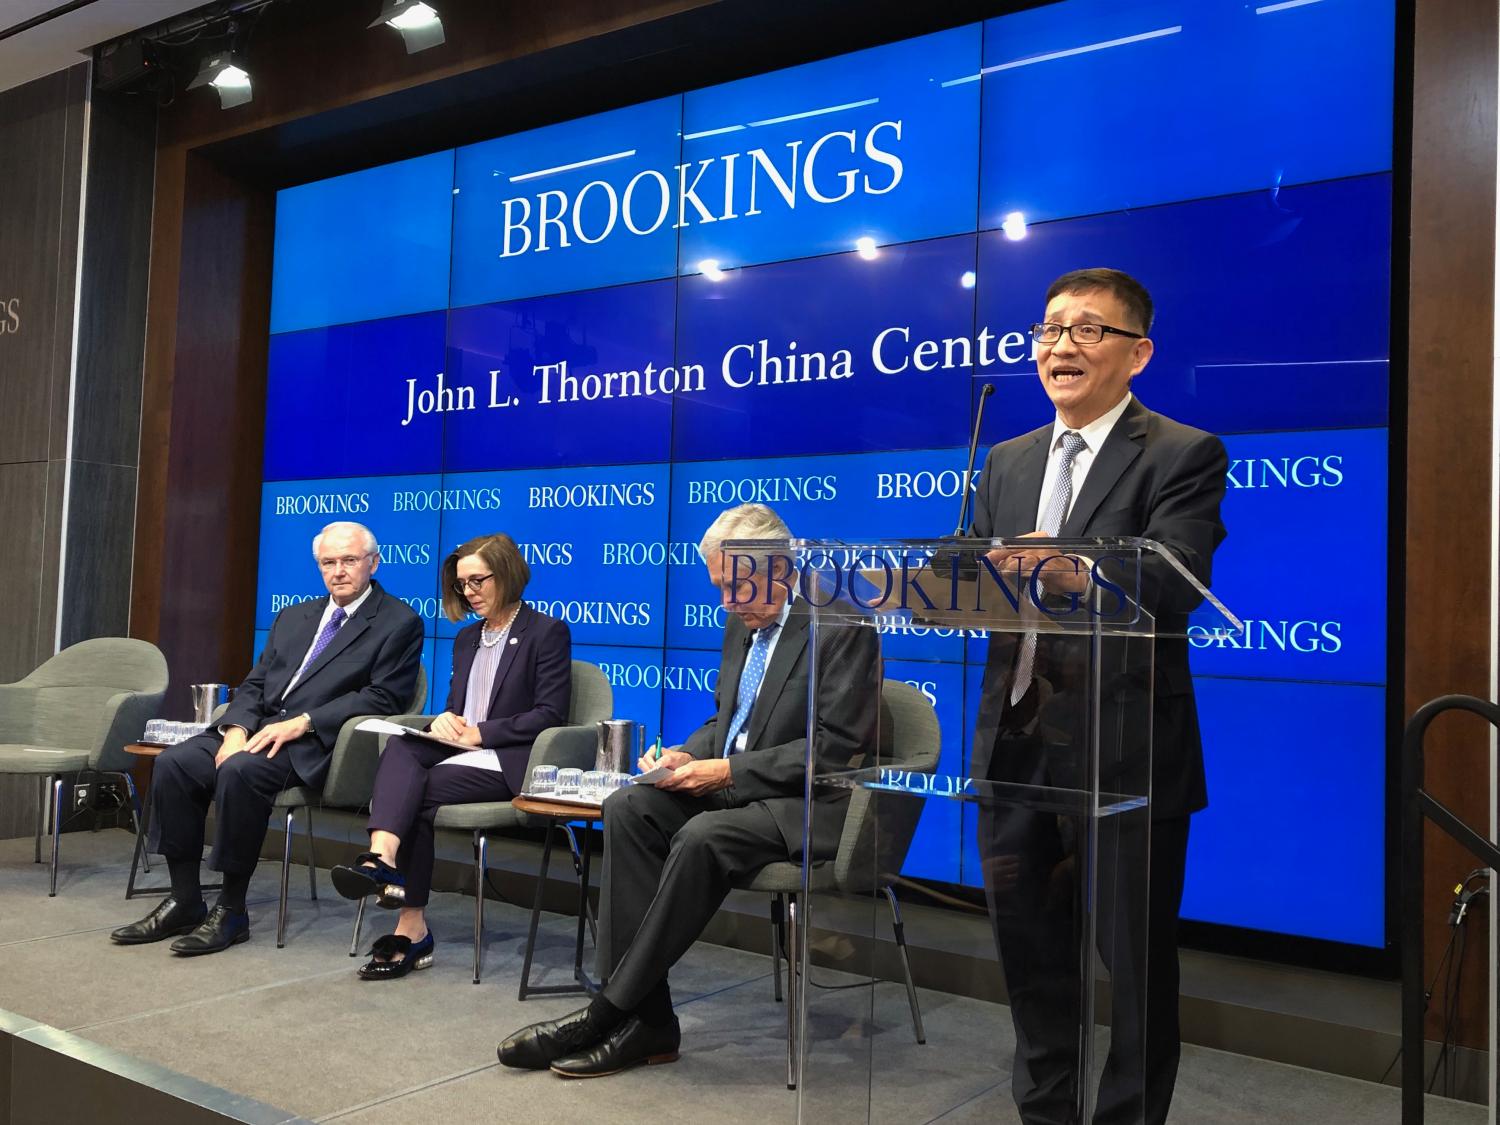 Cheng Li provides welcome remarks for a public event titled "U.S.-China relations: The view from cities and states" at the Brookings Institution in Washington, DC, on July 29, 2019.